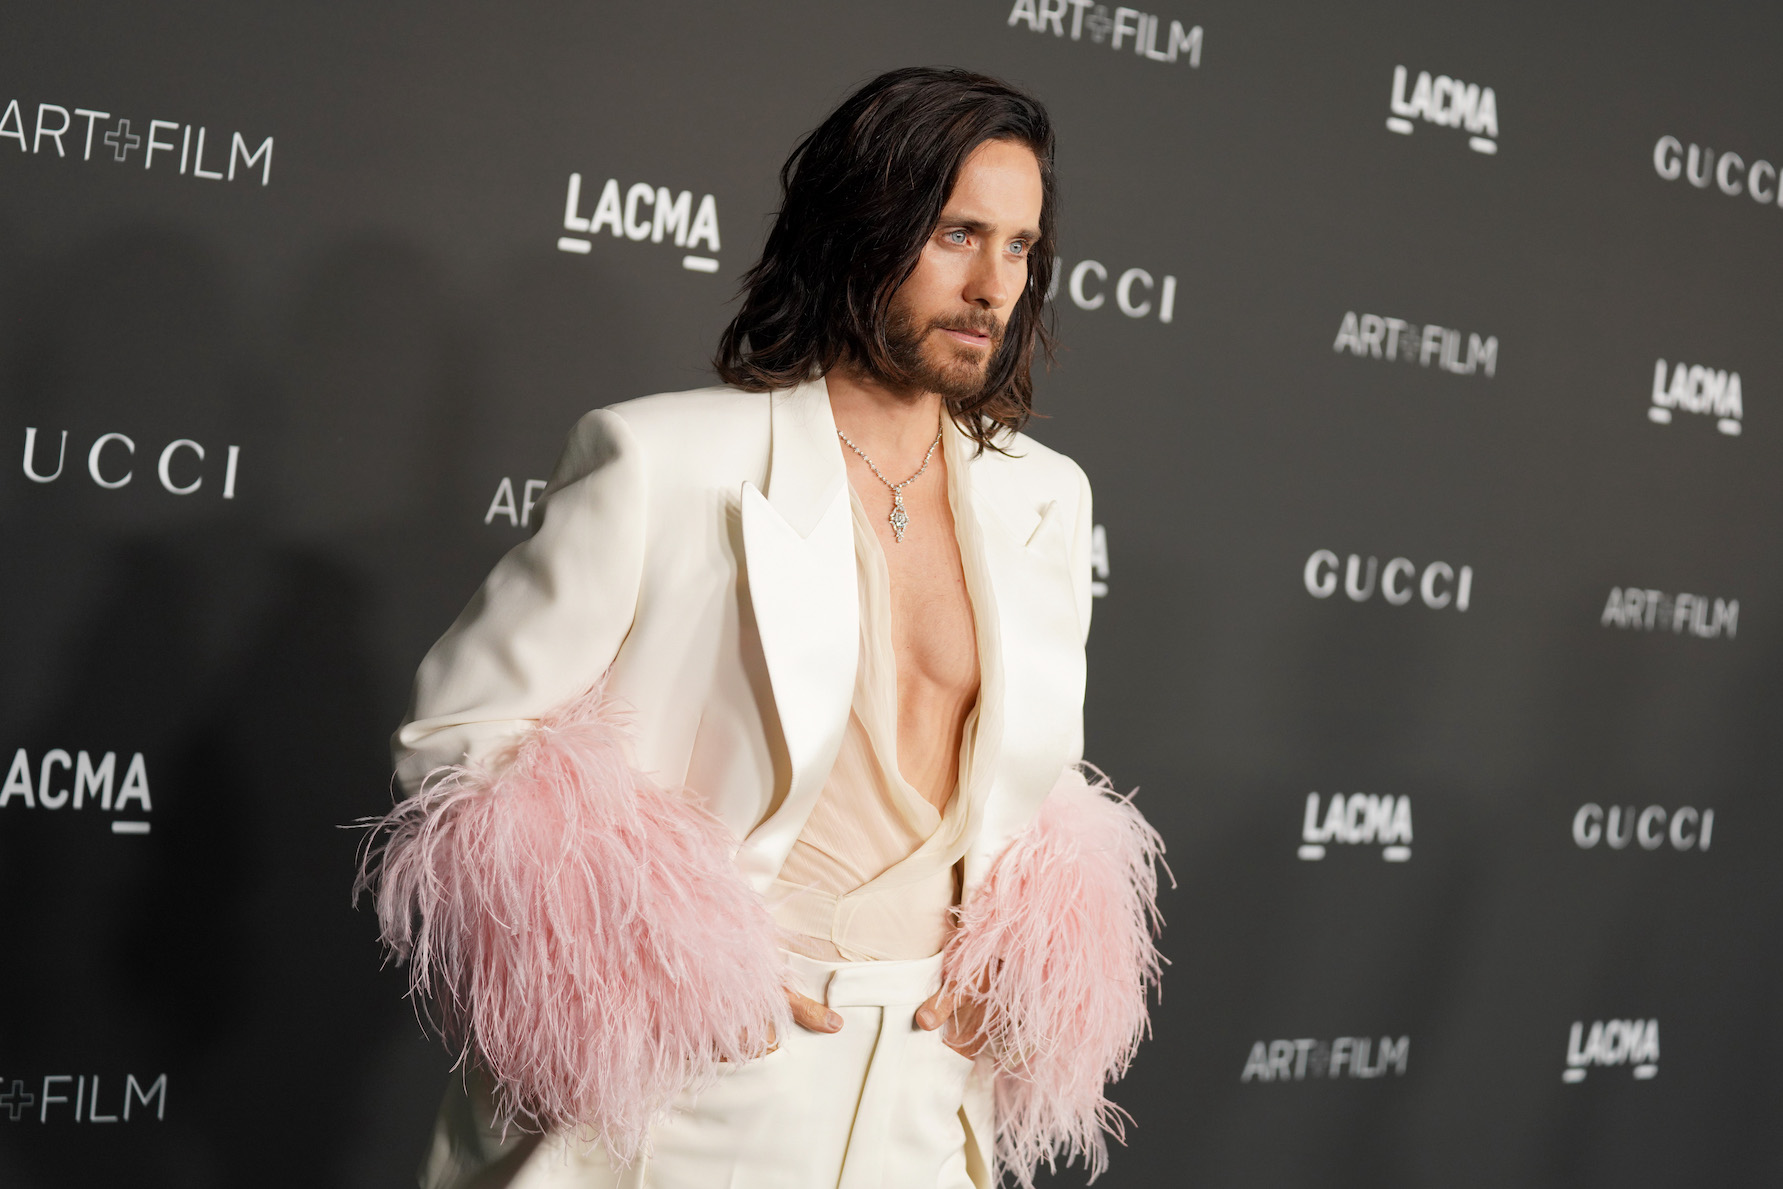  LOS ANGELES, CALIFORNIA - NOVEMBER 06: Jared Leto, wearing Gucci, attends the 10th Annual LACMA ART+FILM GALA honoring Amy Sherald, Kehinde Wiley, and Steven Spielberg presented by Gucci at Los Angeles County Museum of Art on November 06, 2021 in Los Angeles, California. (Photo by Presley Ann/Getty Images for LACMA)